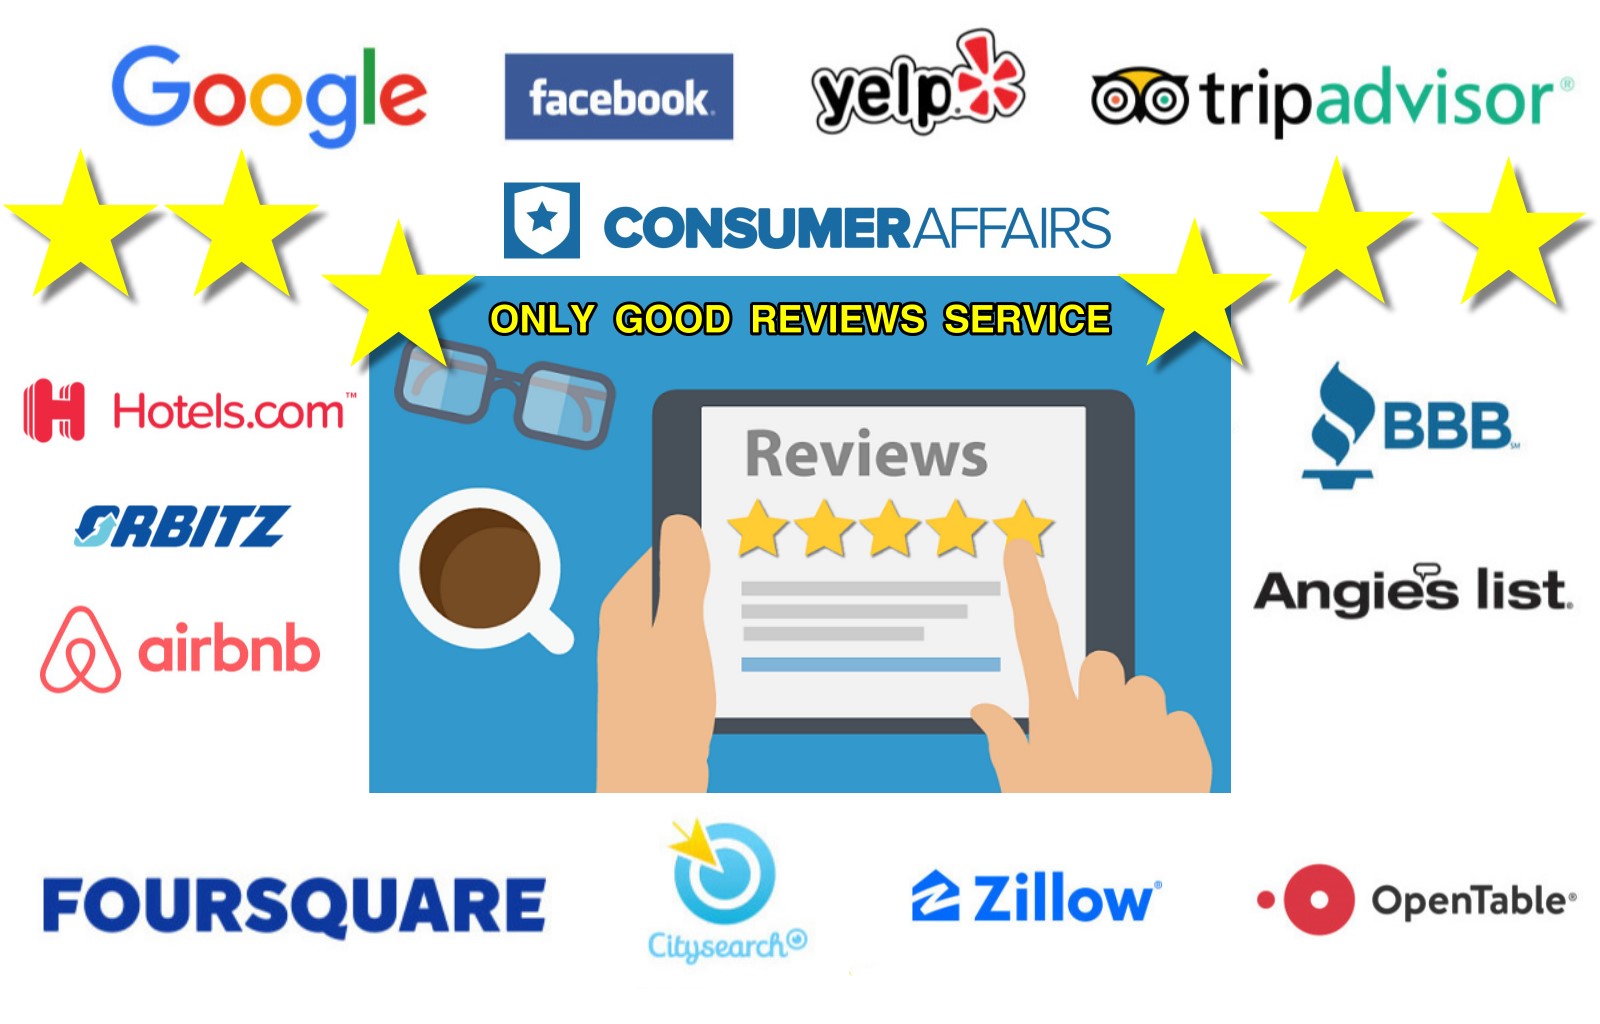 only good reviews service